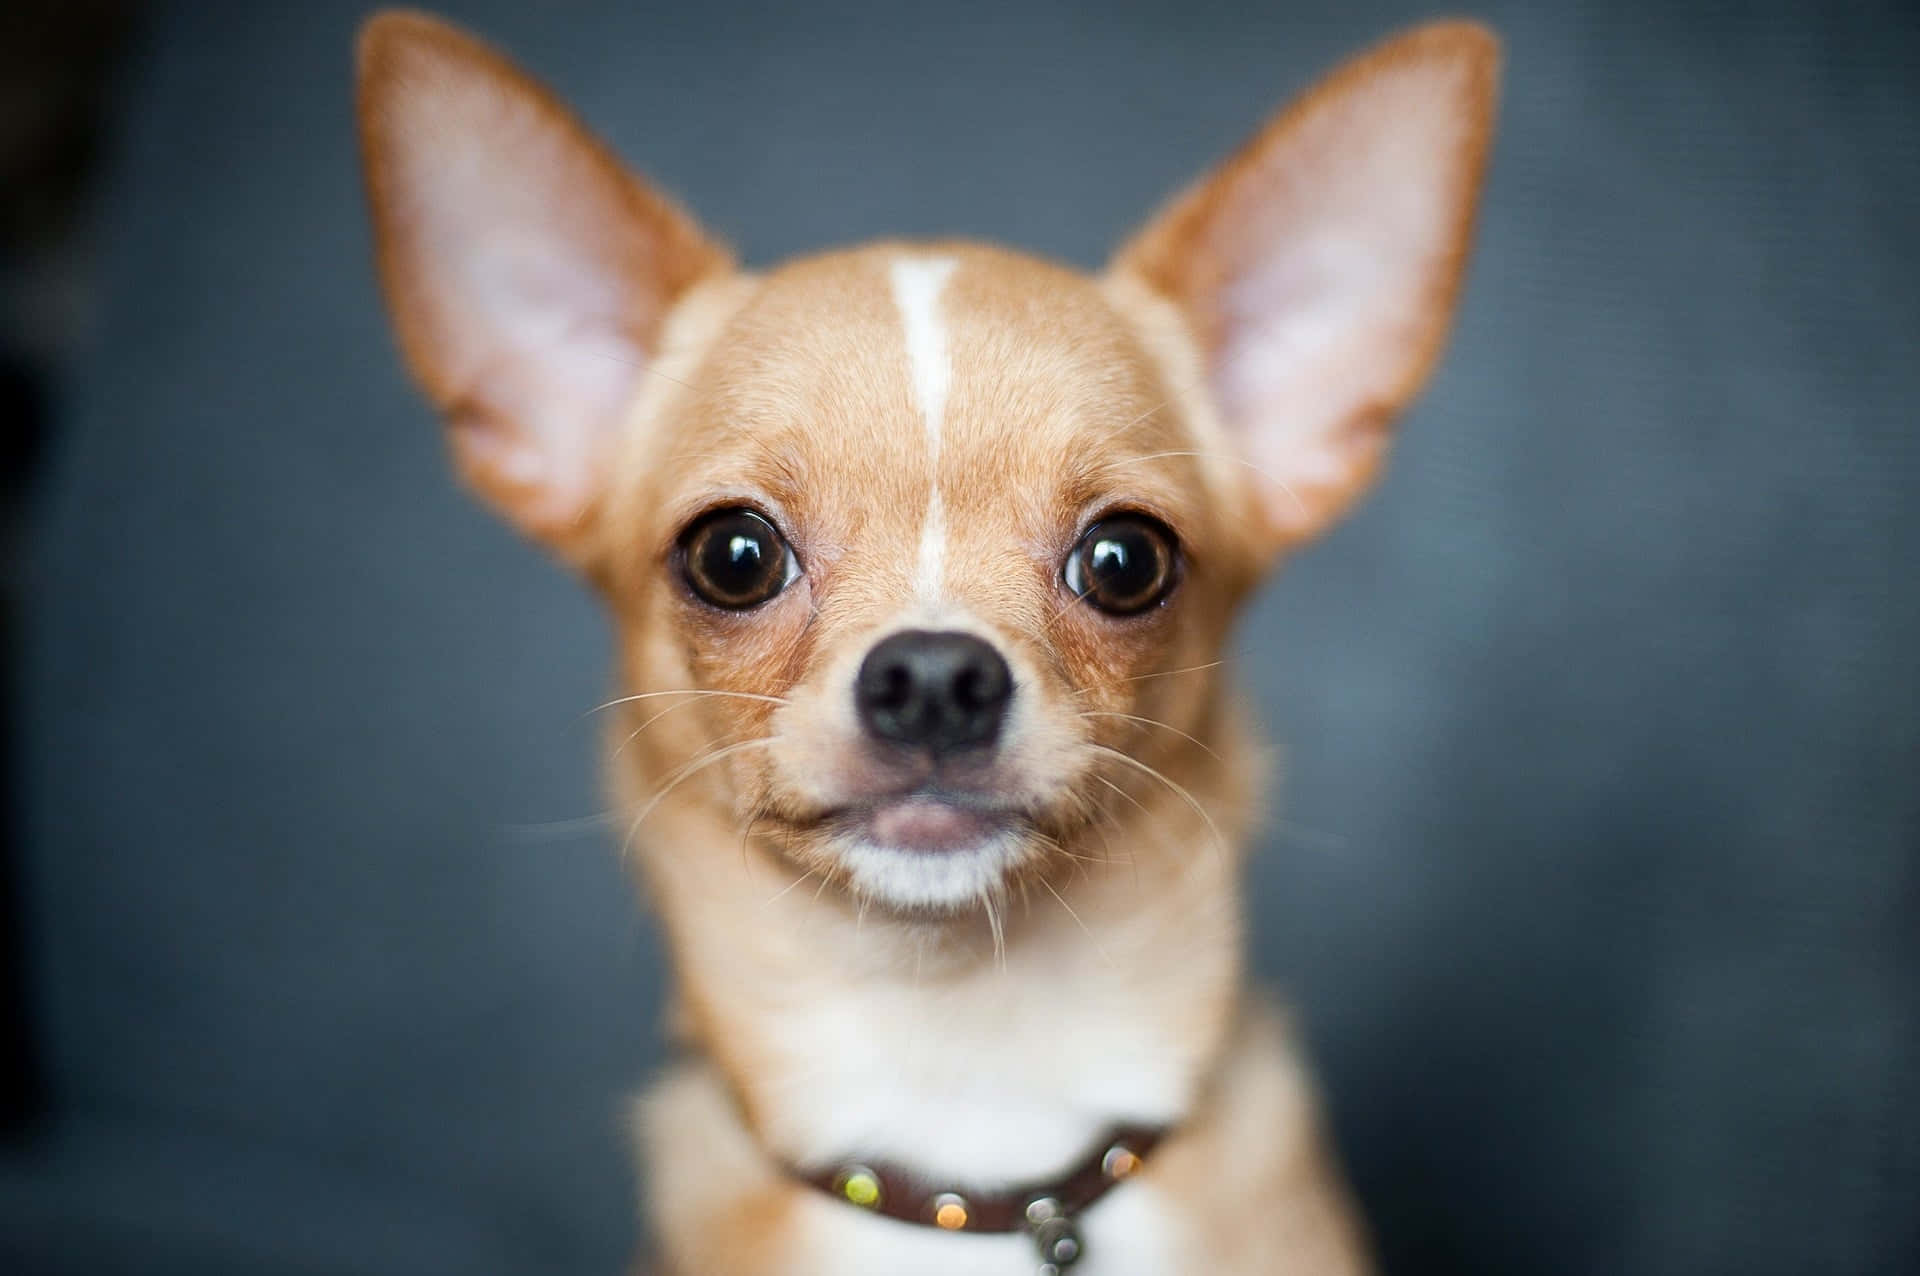 This Adorable Chihuahua is Ready for a Fun Adventure